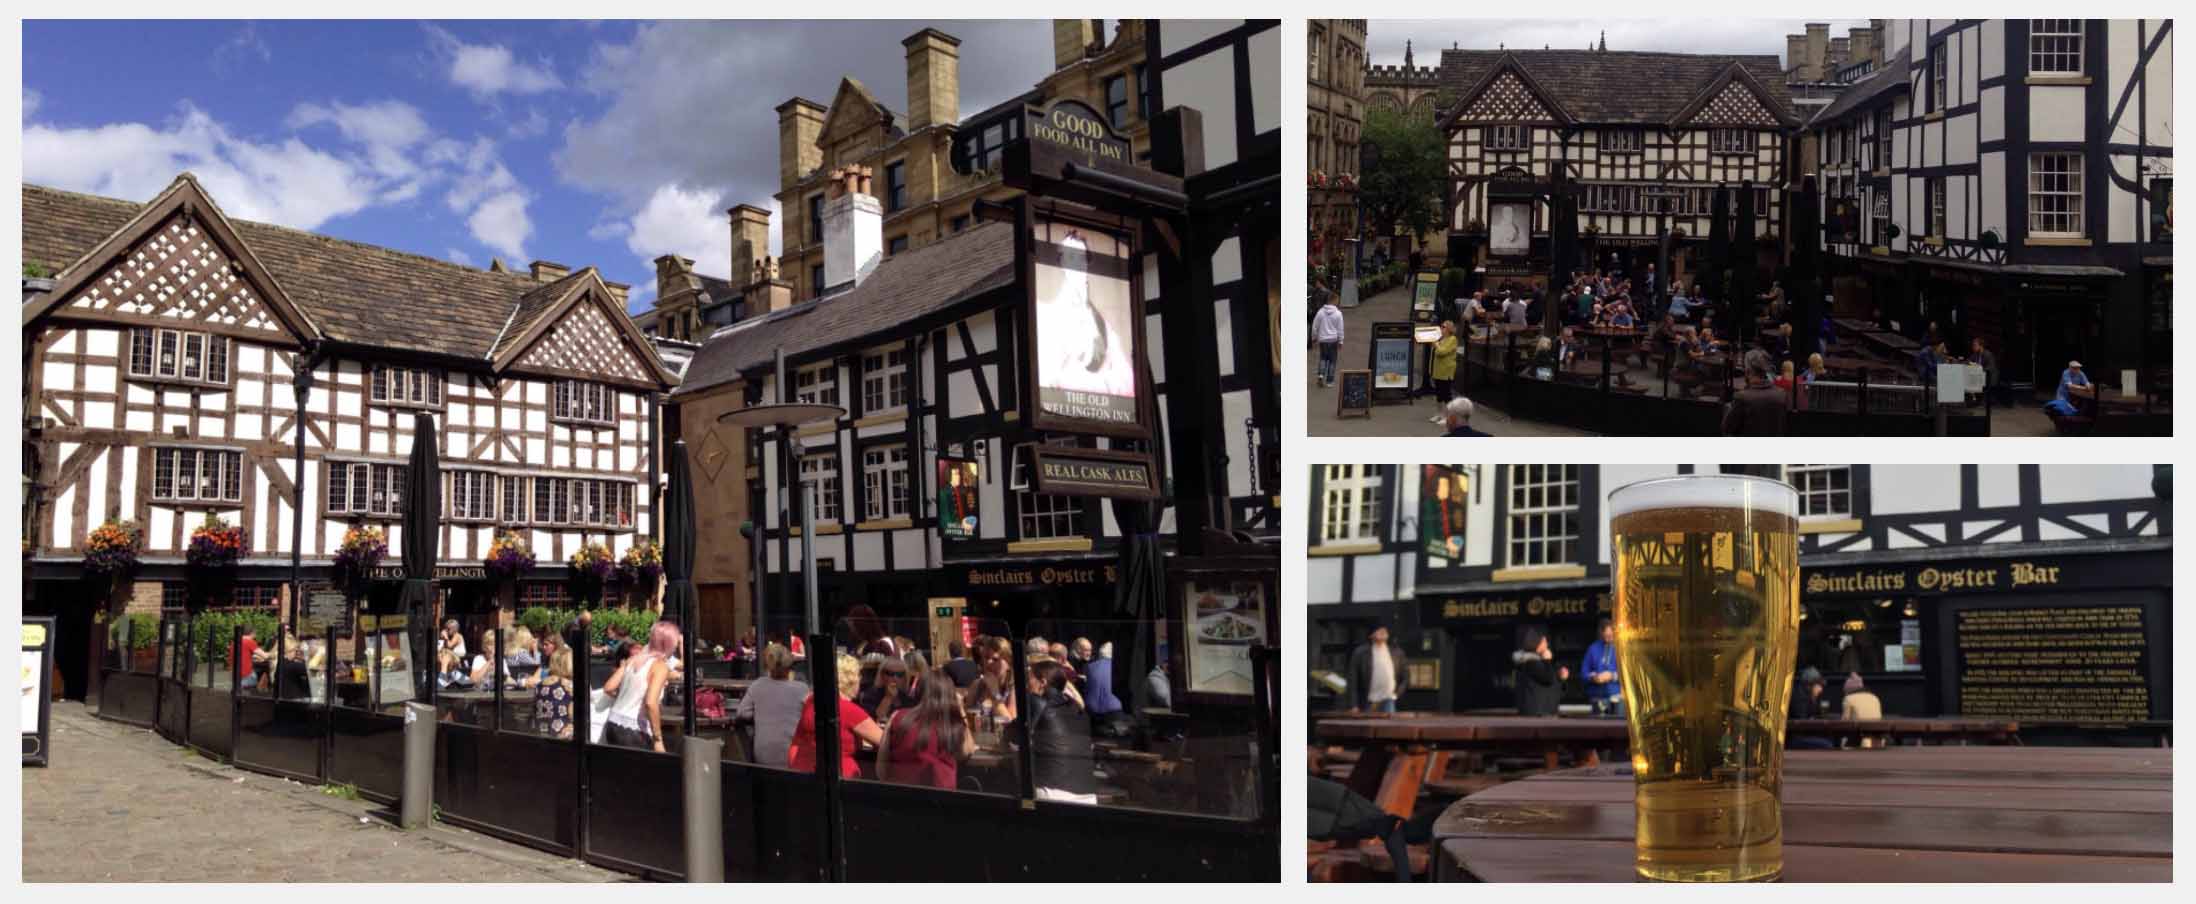 Best Beer Gardens in Manchester - Sinclair's Oyster Bar